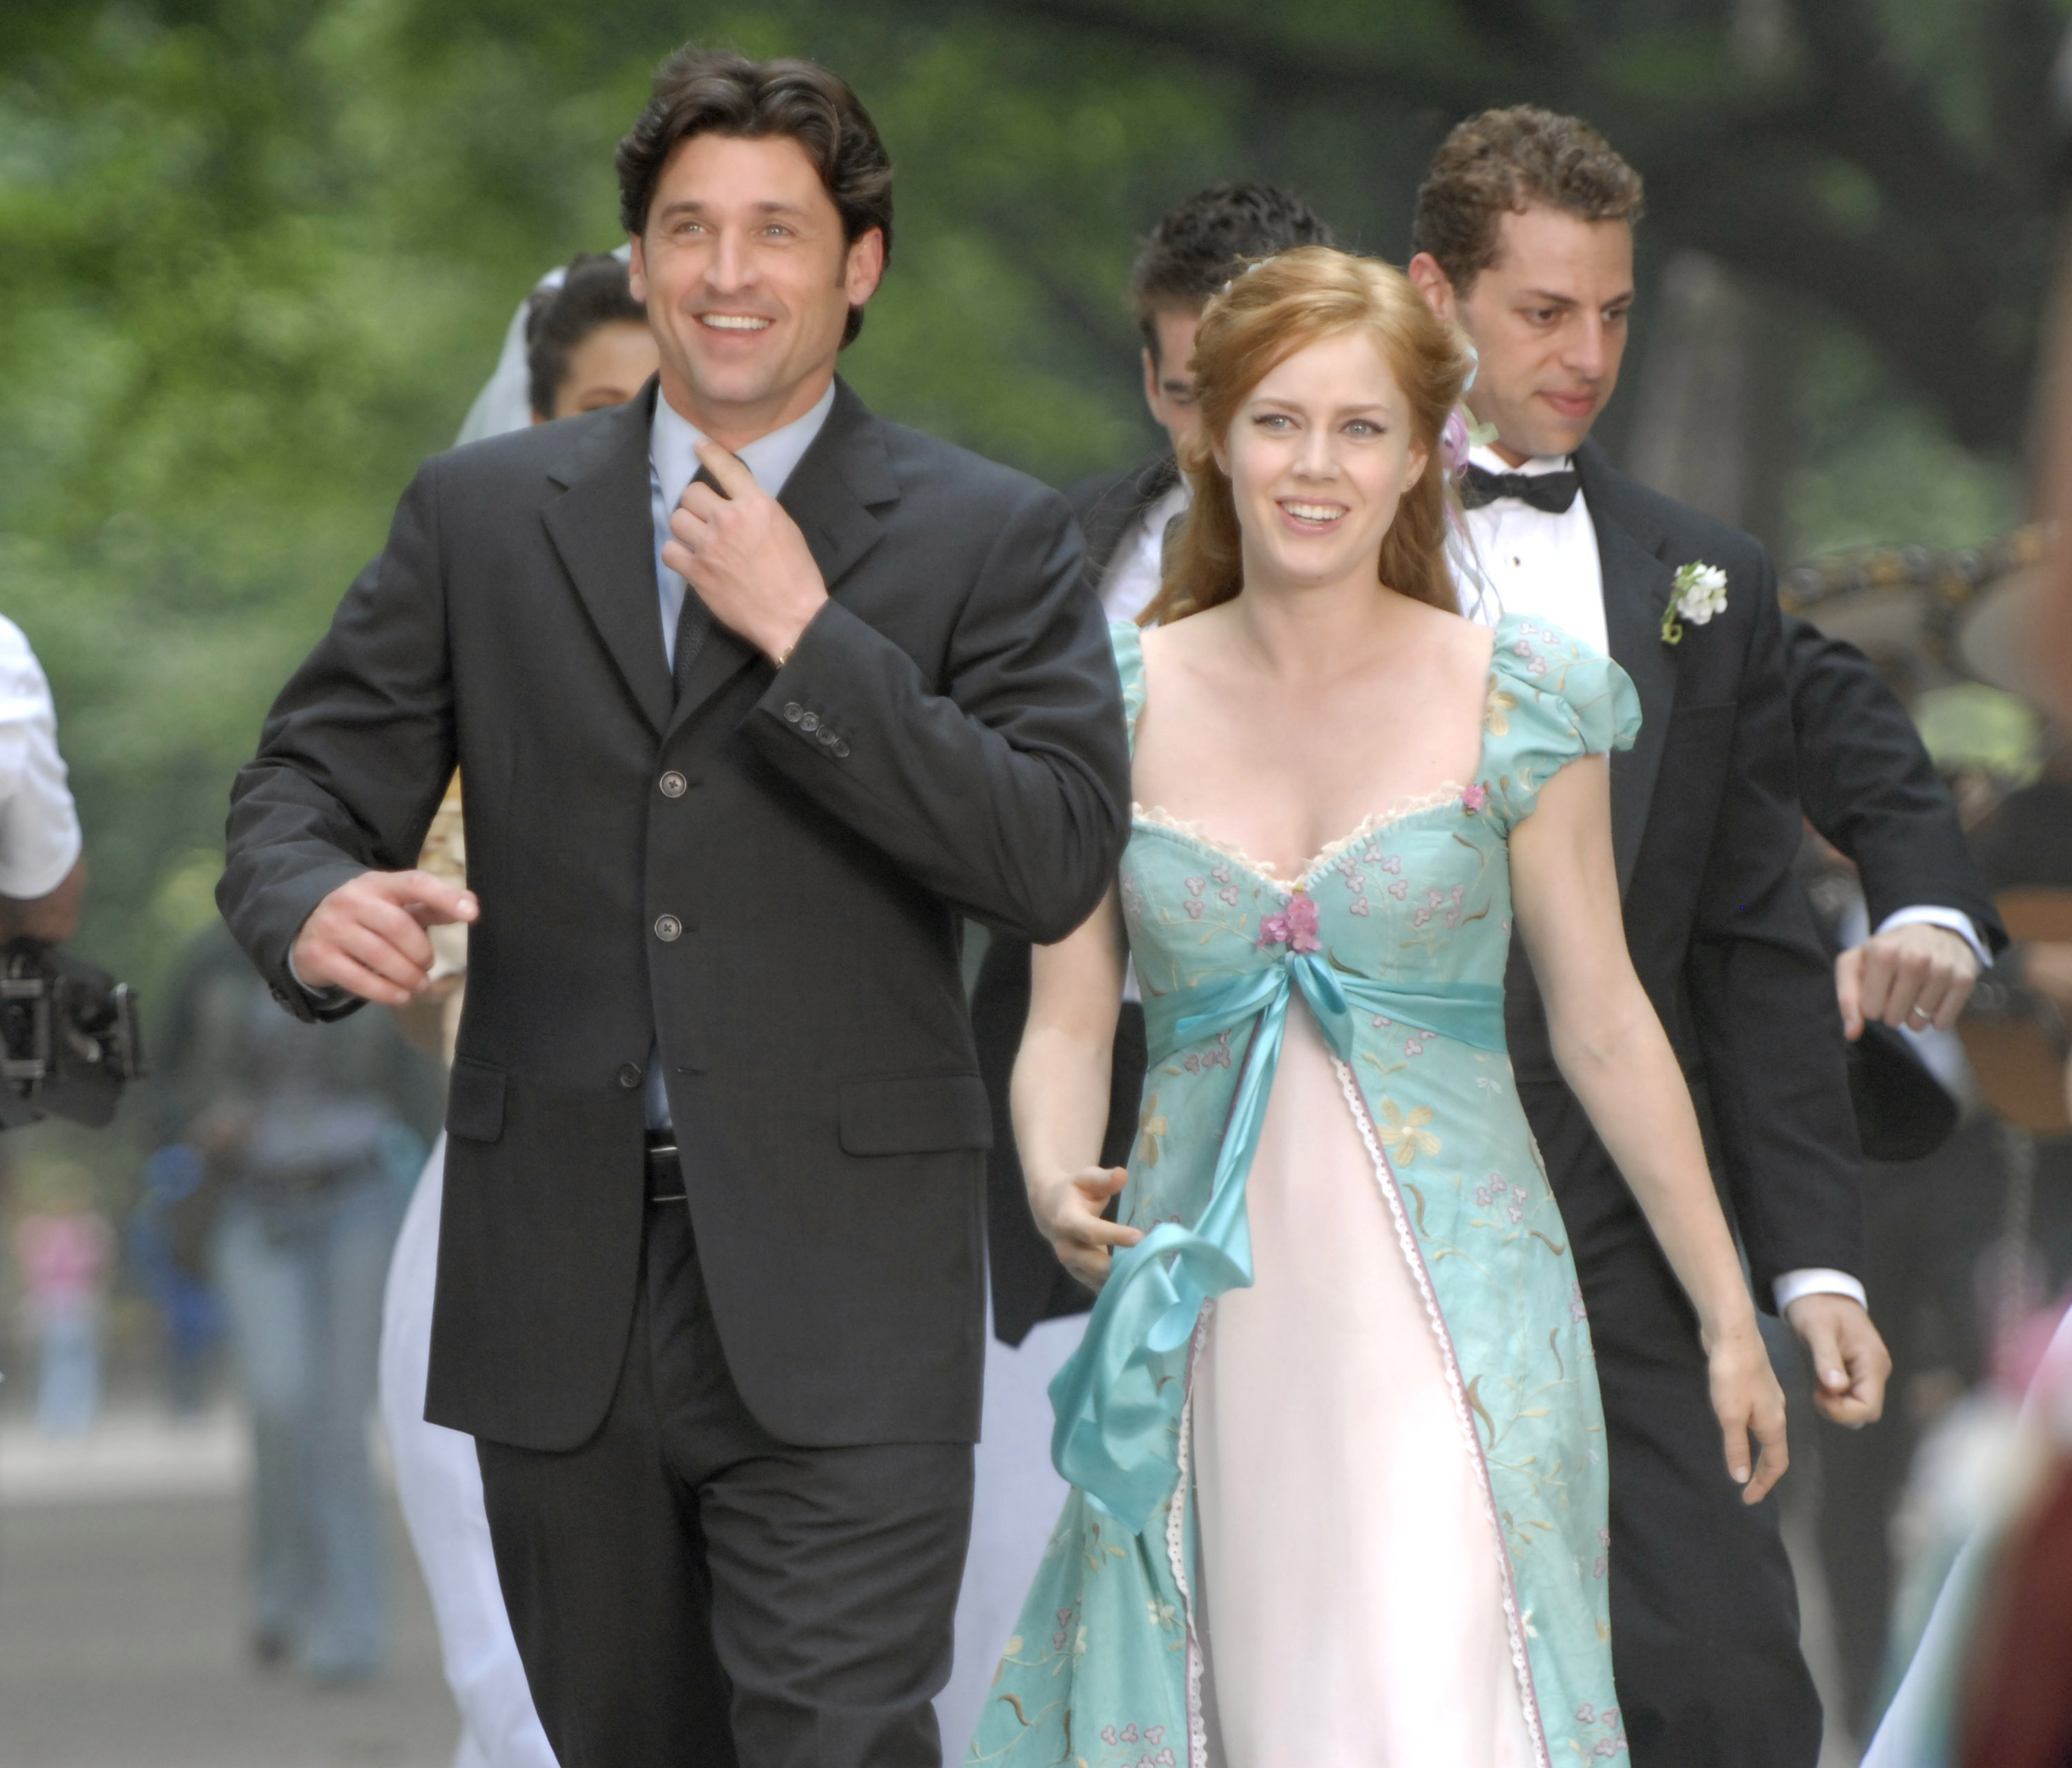 Patrick Dempsey and Amy Adams during Patrick Dempsey, Amy Adams and Jeff Watson on the Set of Disney's "Enchanted" - July 10, 2006 at Central Park in New York City, New York, United States.Patrick Dempsey movies and TV shows)